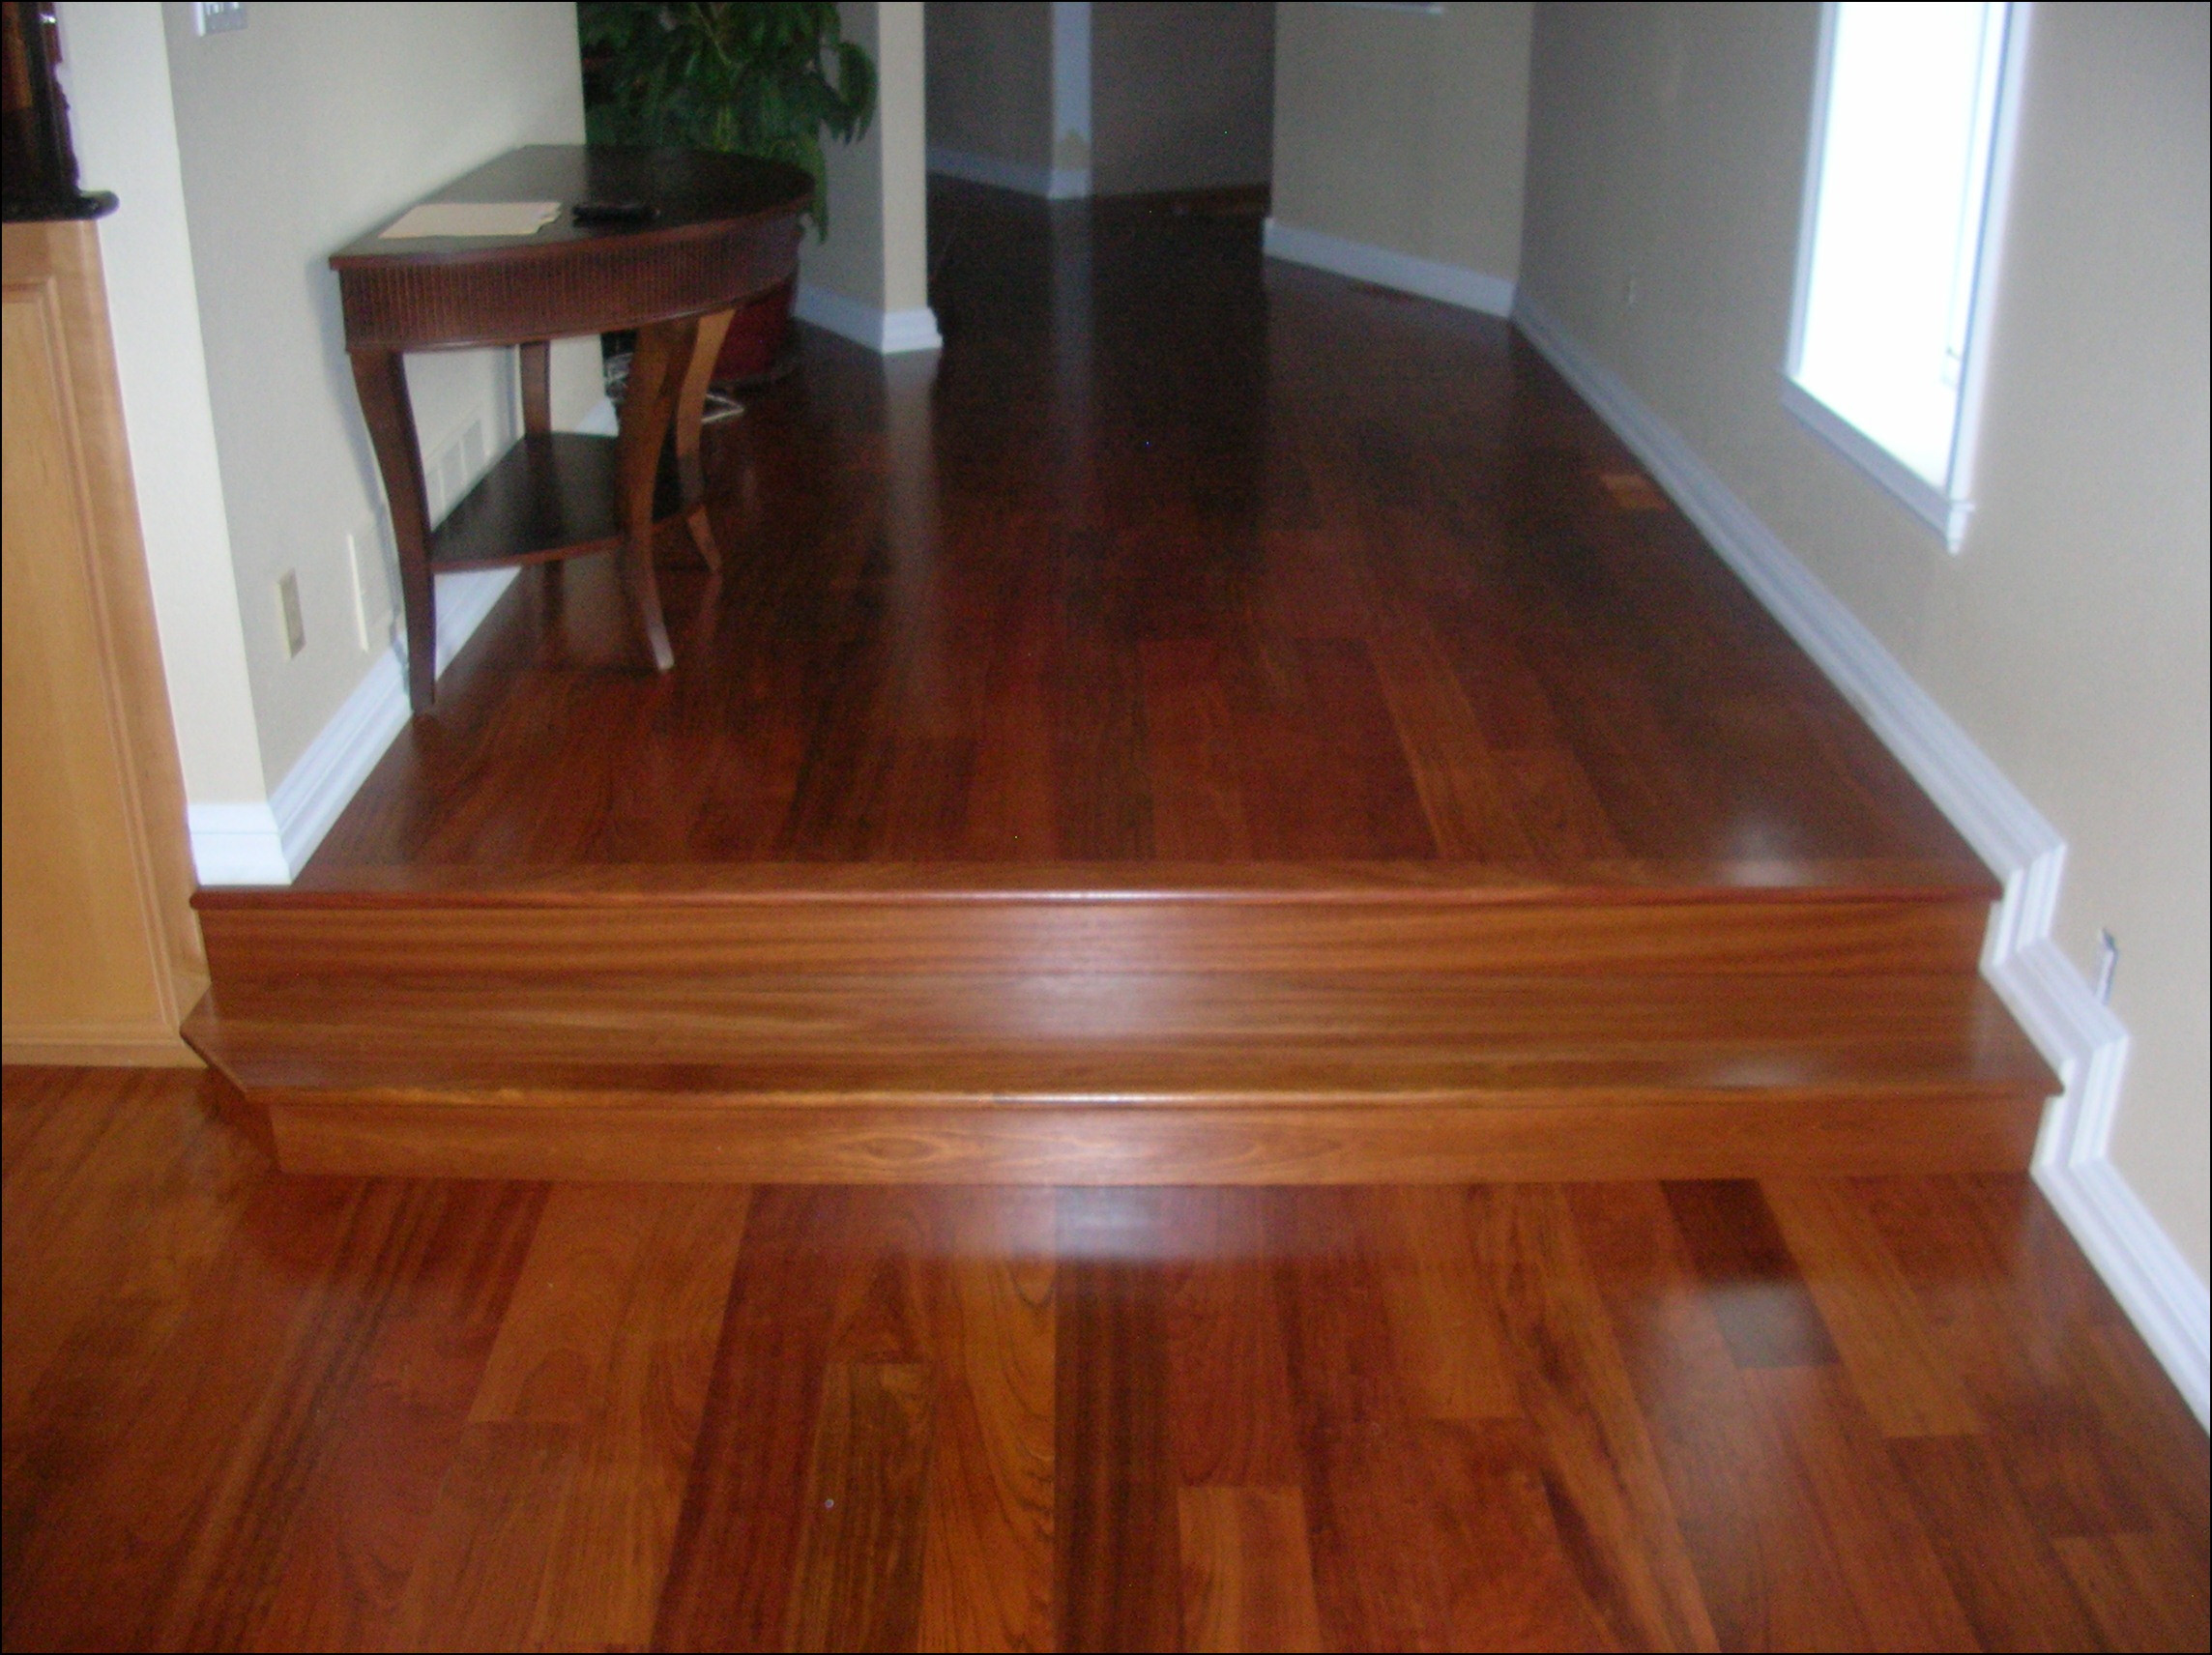 15 Awesome Hardwood Floor Refinishing Tulsa Ok 2023 free download hardwood floor refinishing tulsa ok of best place flooring ideas with regard to best place to buy engineered hardwood flooring stock ideal floors no carpet other then area carpet